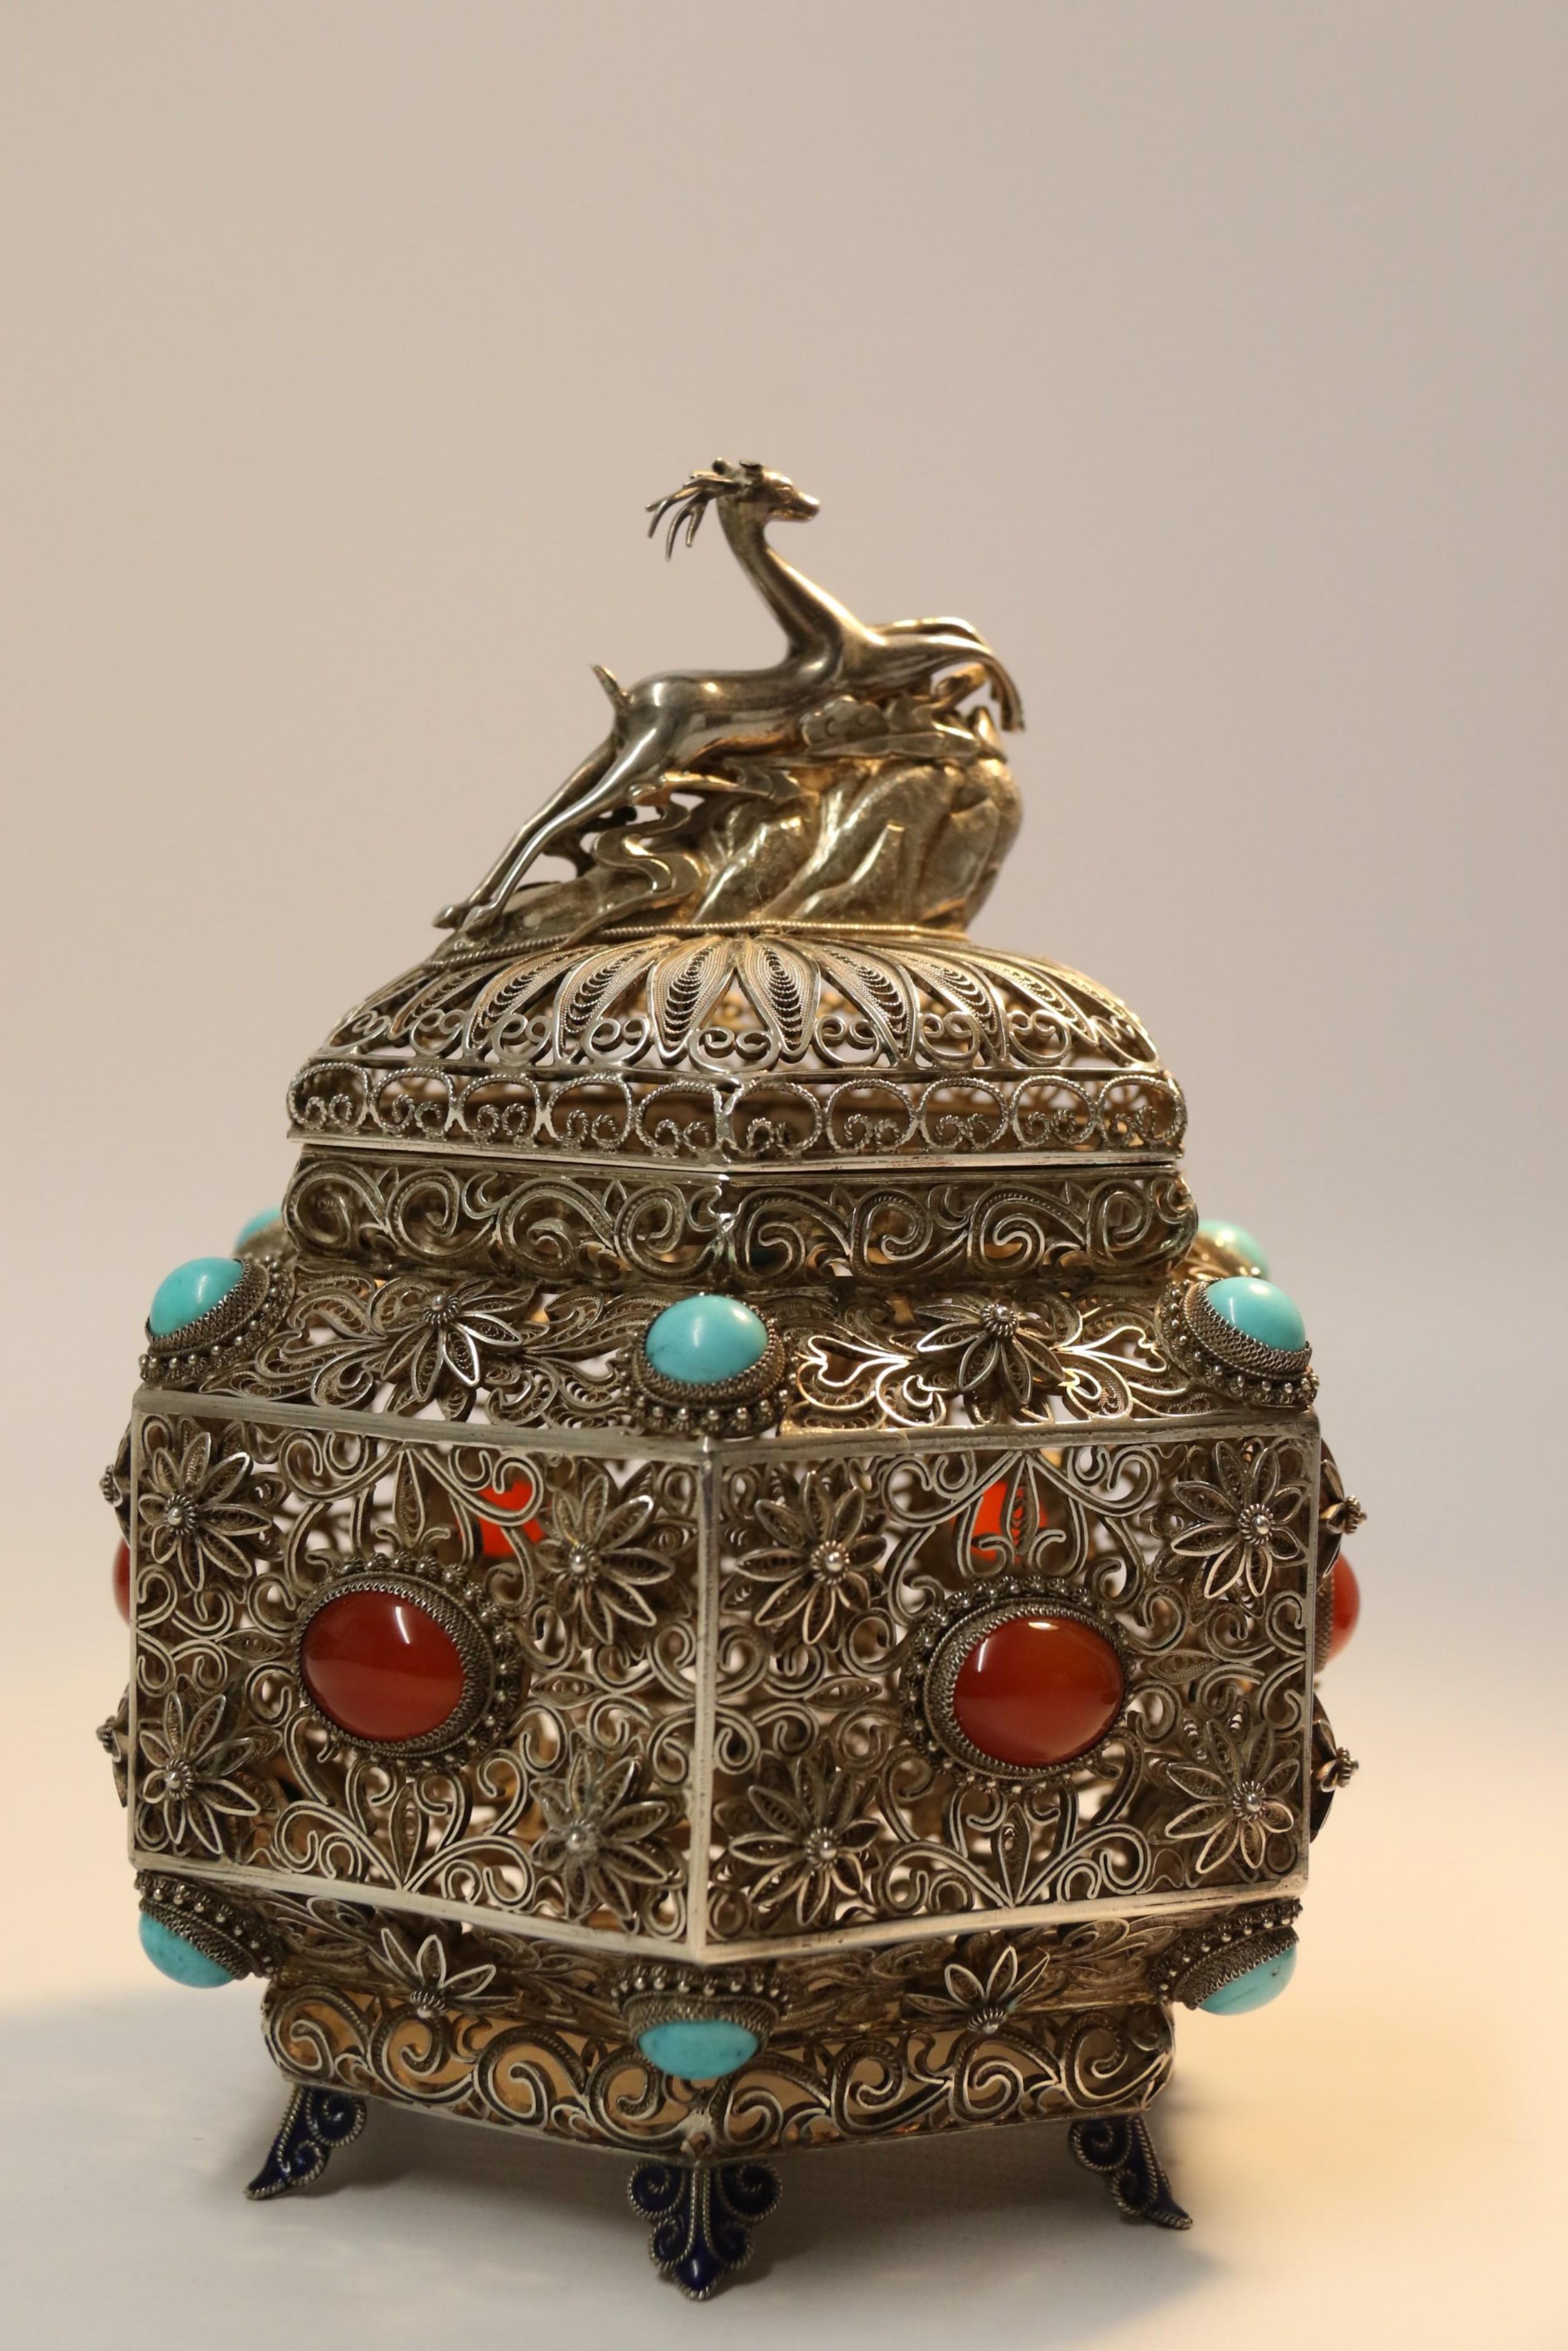 19th Century Indian Silver Filigree Work Incense Burner with Mounted Cabochons For Sale 1